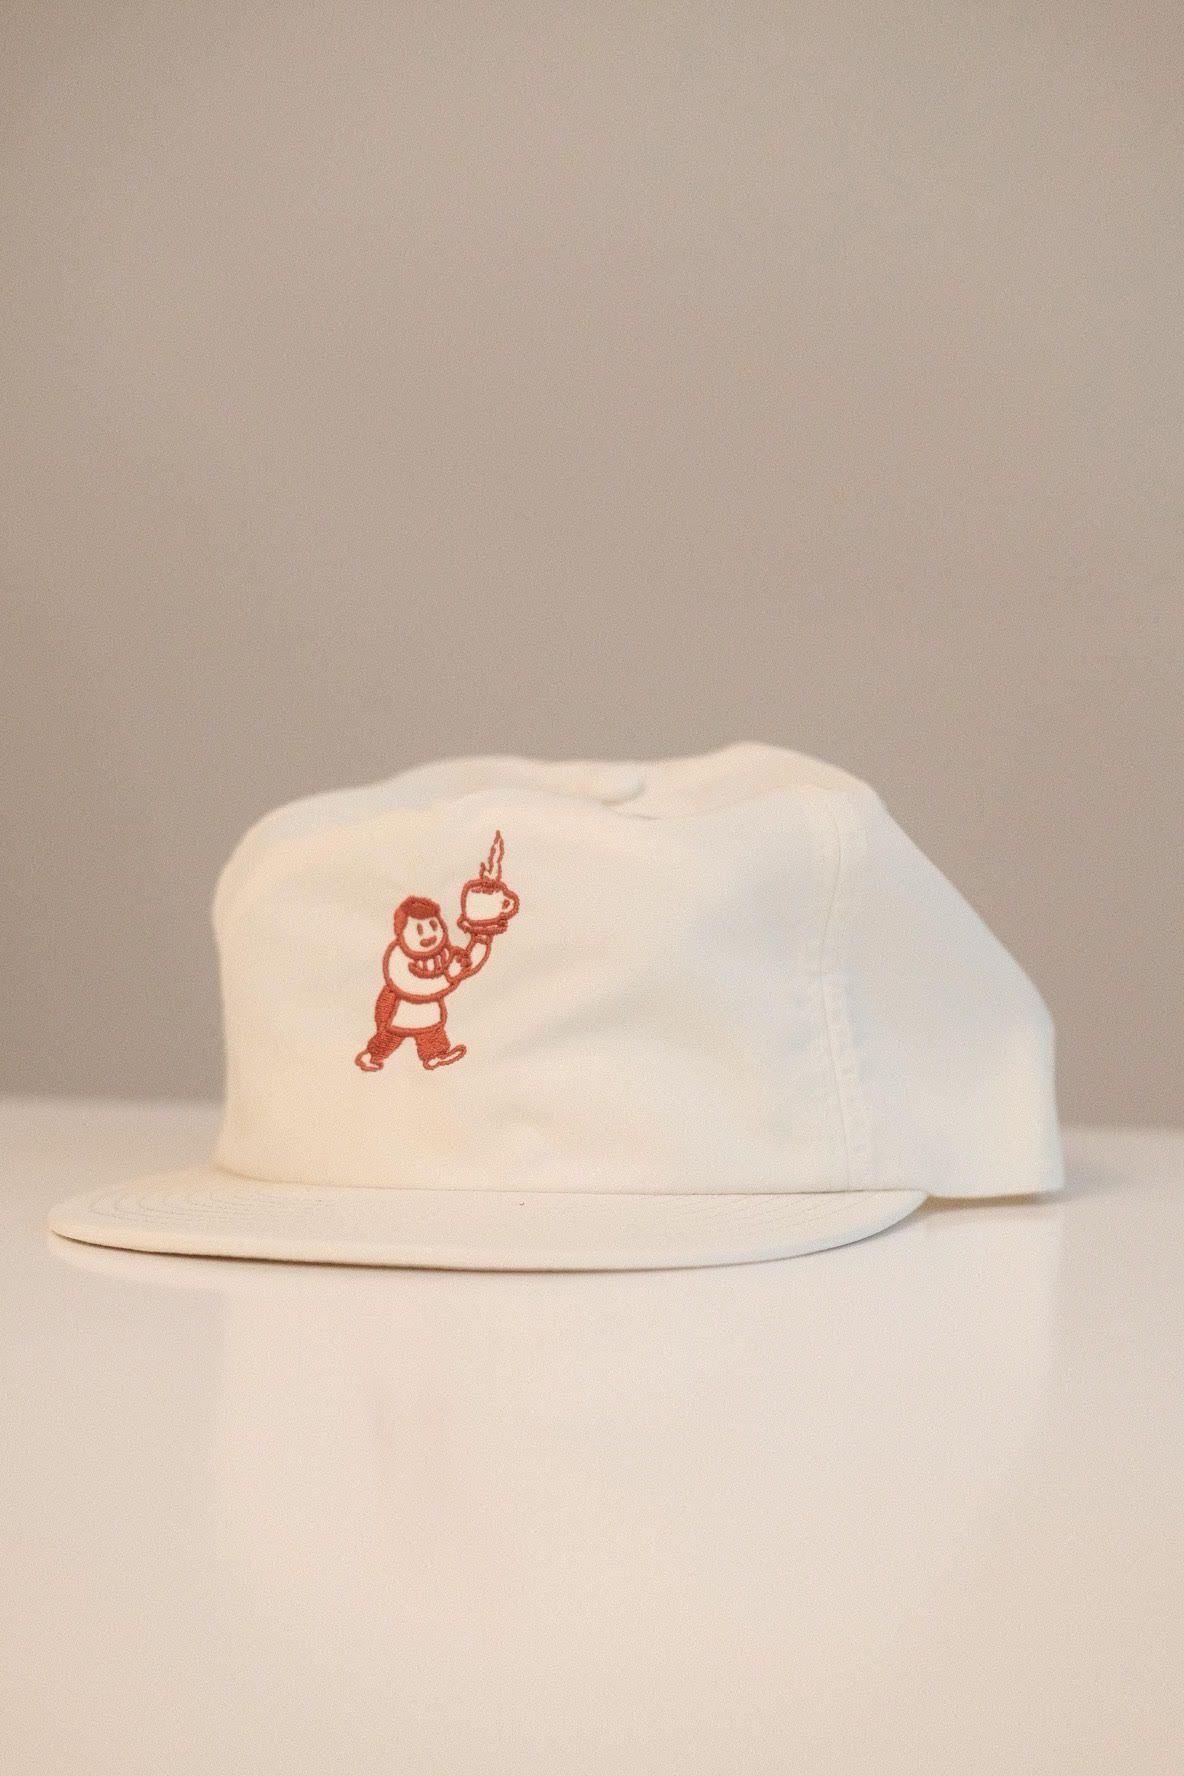 A white hat with a red illustration.